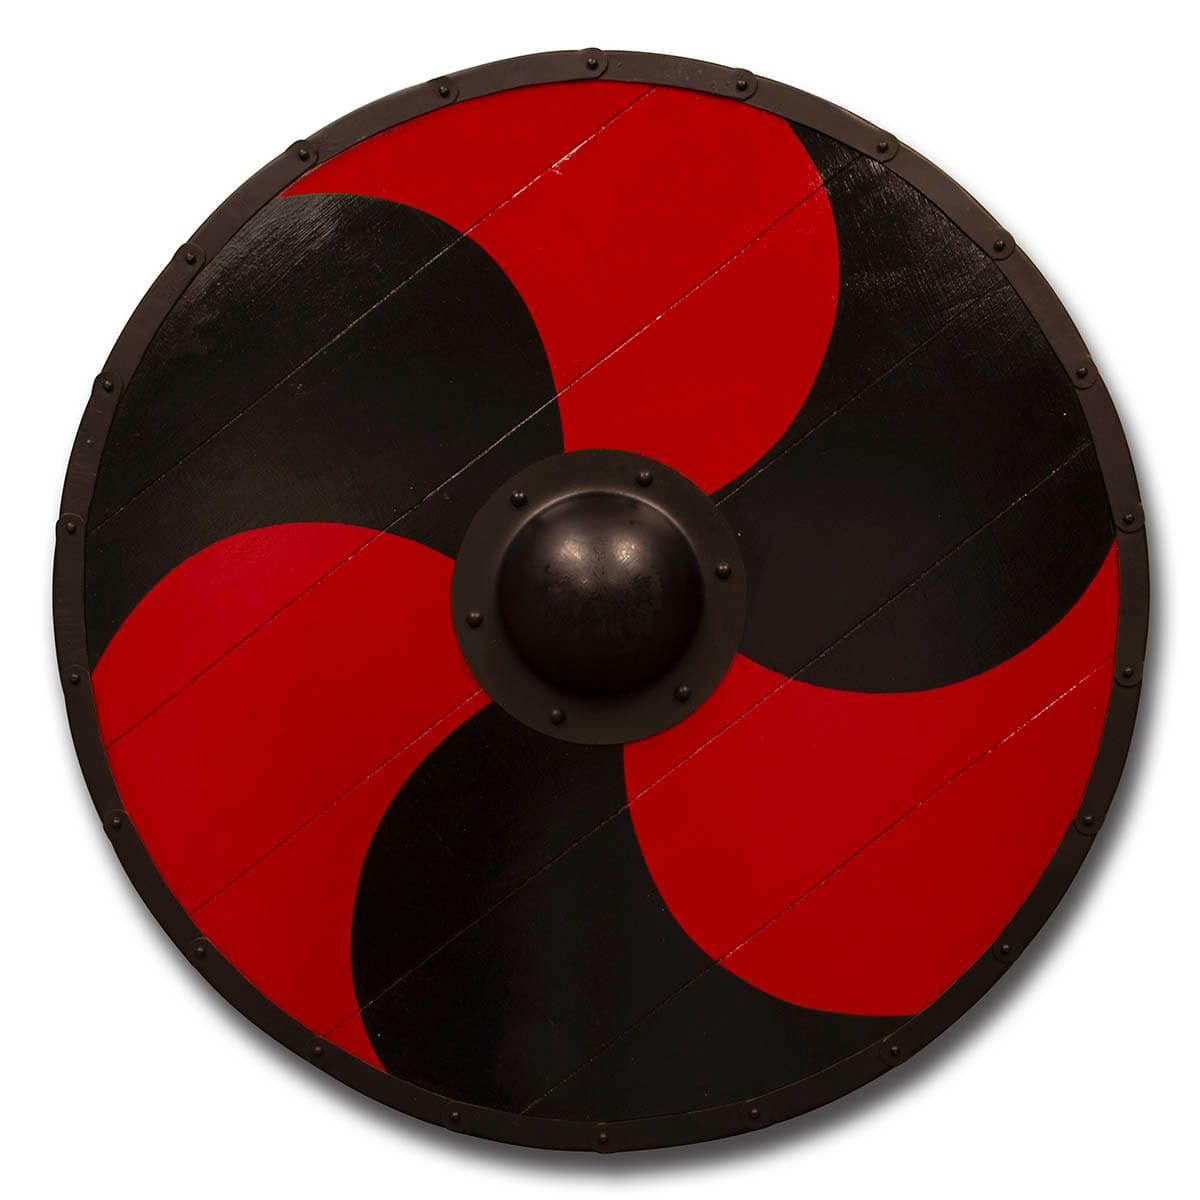 Viking Shield made with wood planks and hand painted with red and black spiral design